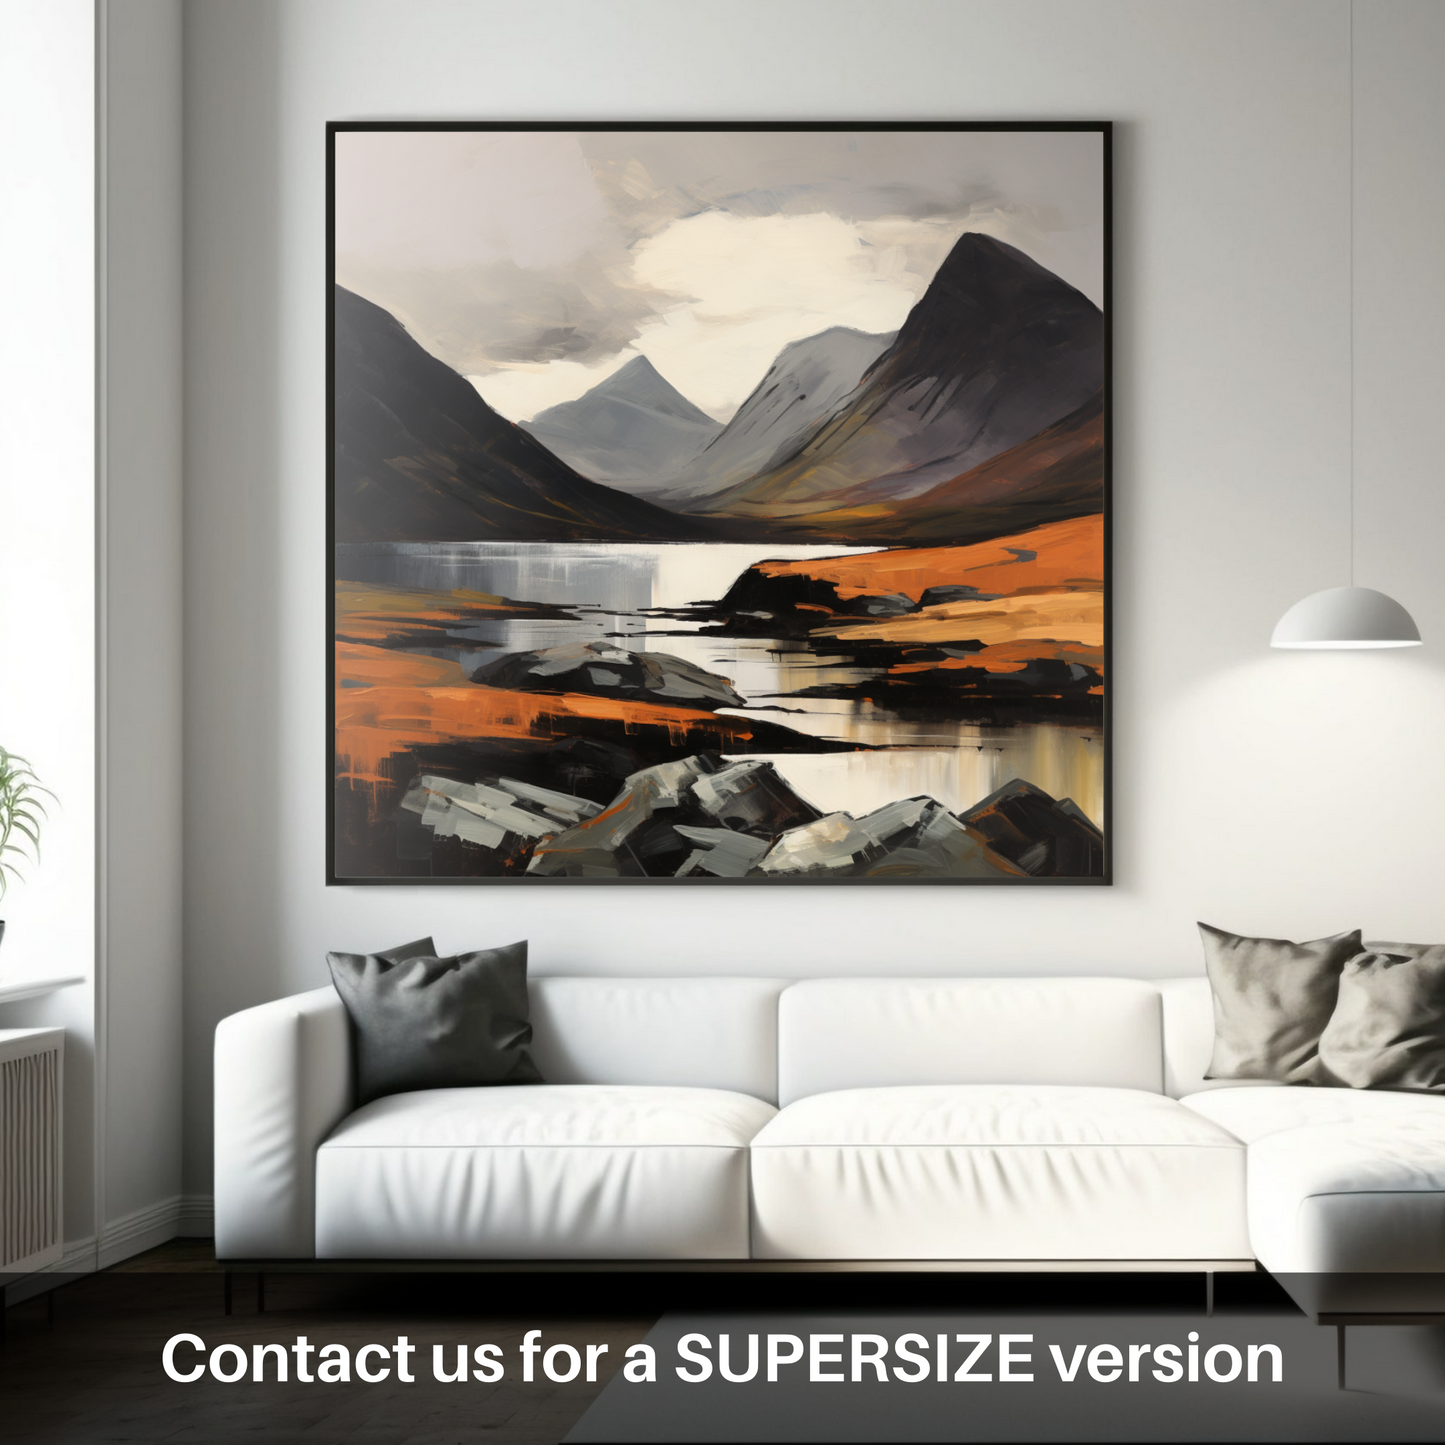 Huge supersize print of Liathach, Wester Ross